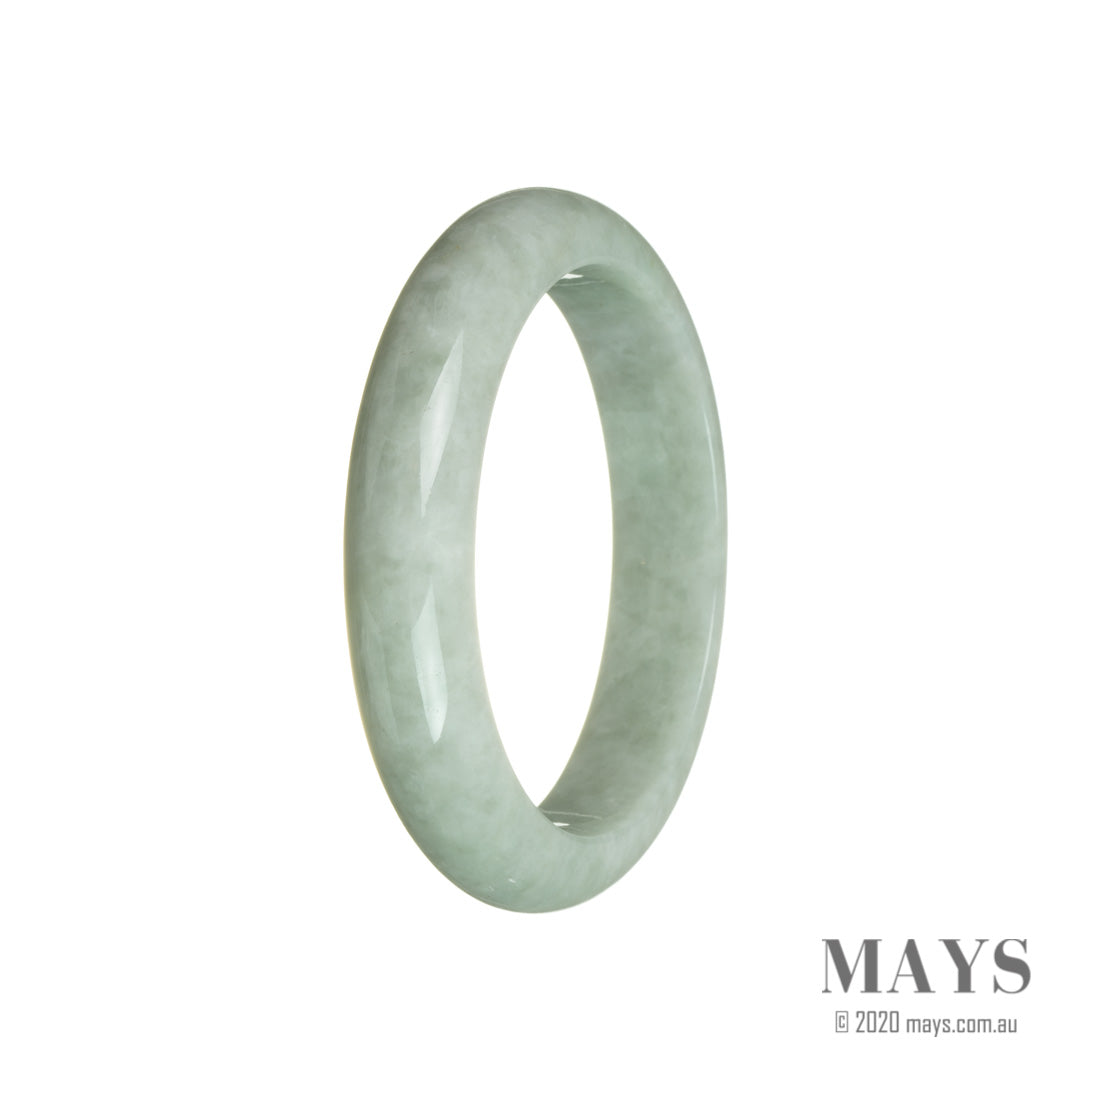 Authentic Untreated Green Traditional Jade Bangle Bracelet - 58mm Half Moon